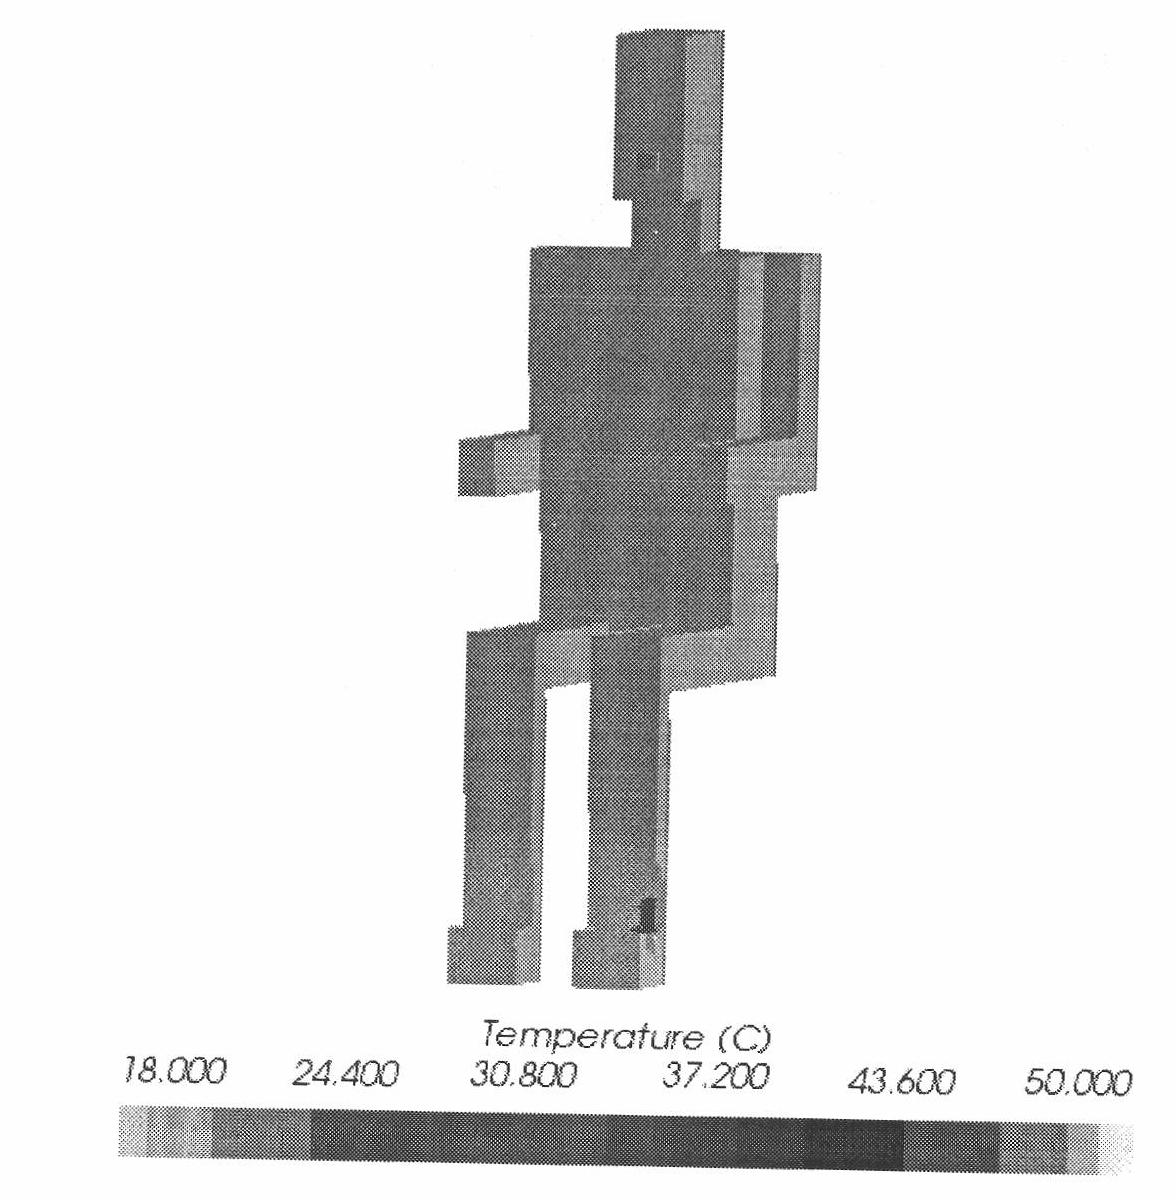 Human body thermal simulation modeling method suitable for complex space environment